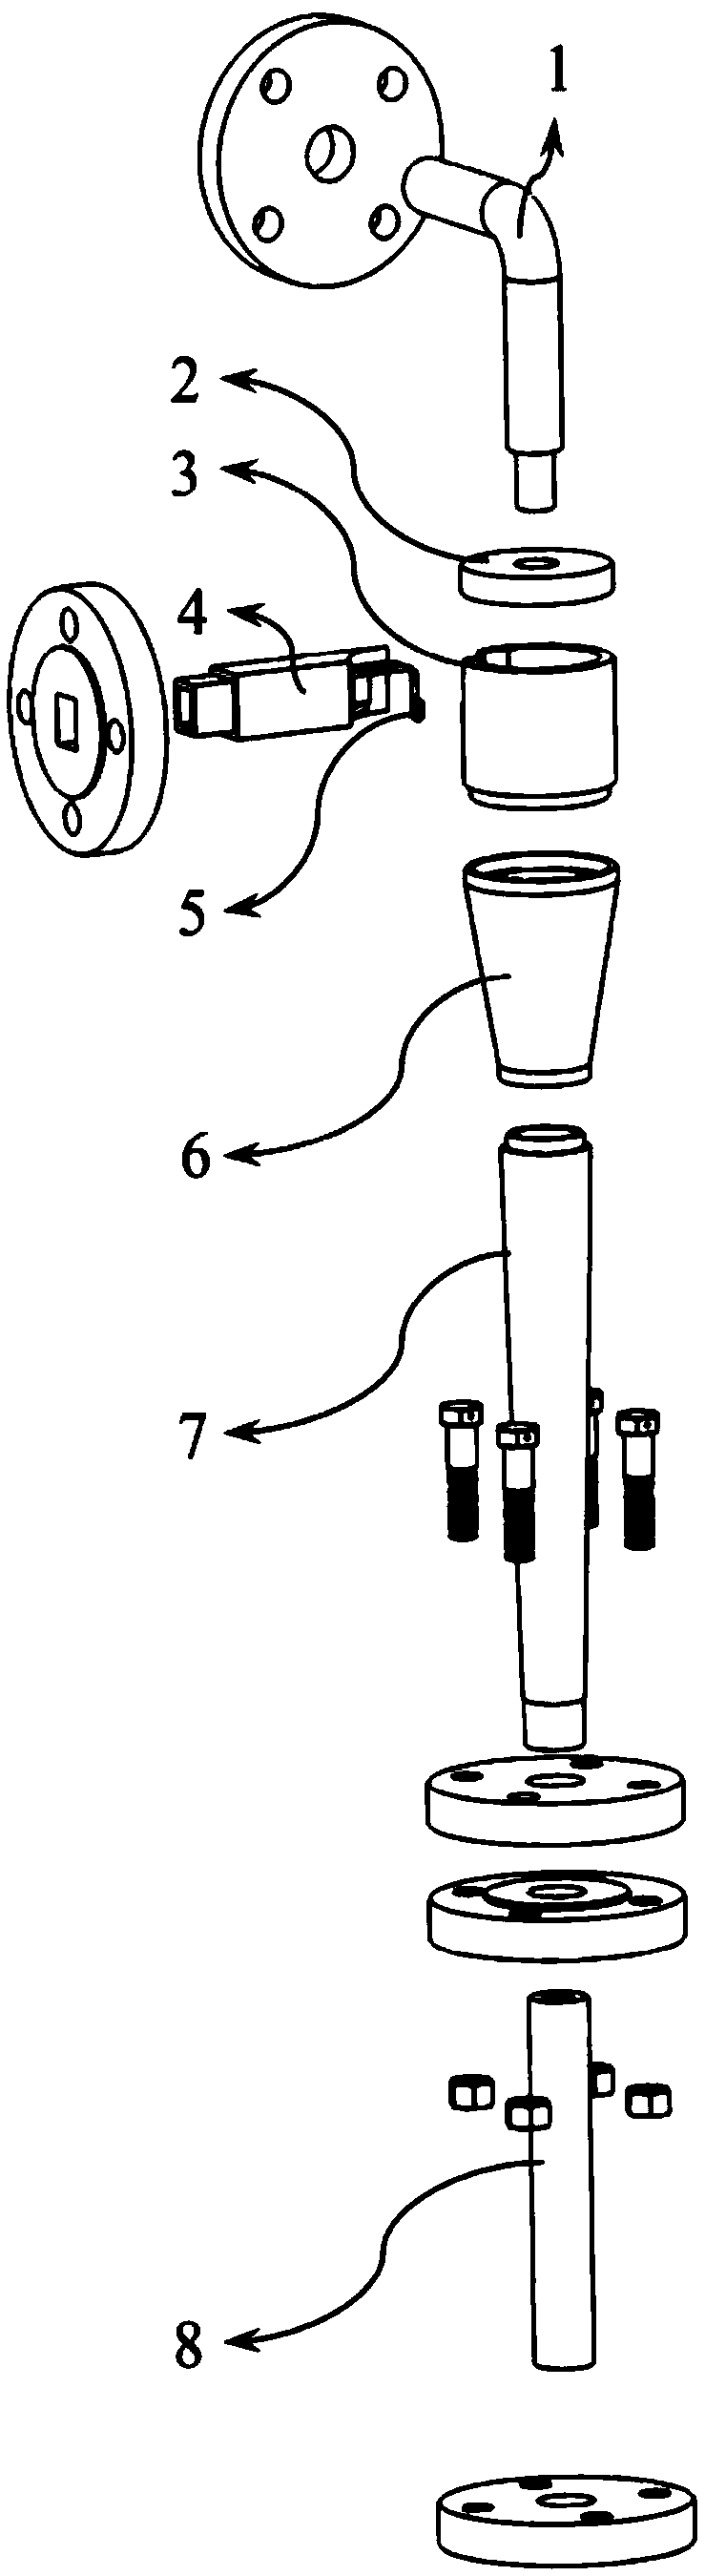 Tangential inlet capable of achieving twice separation and single-stage oil-water cyclone separator